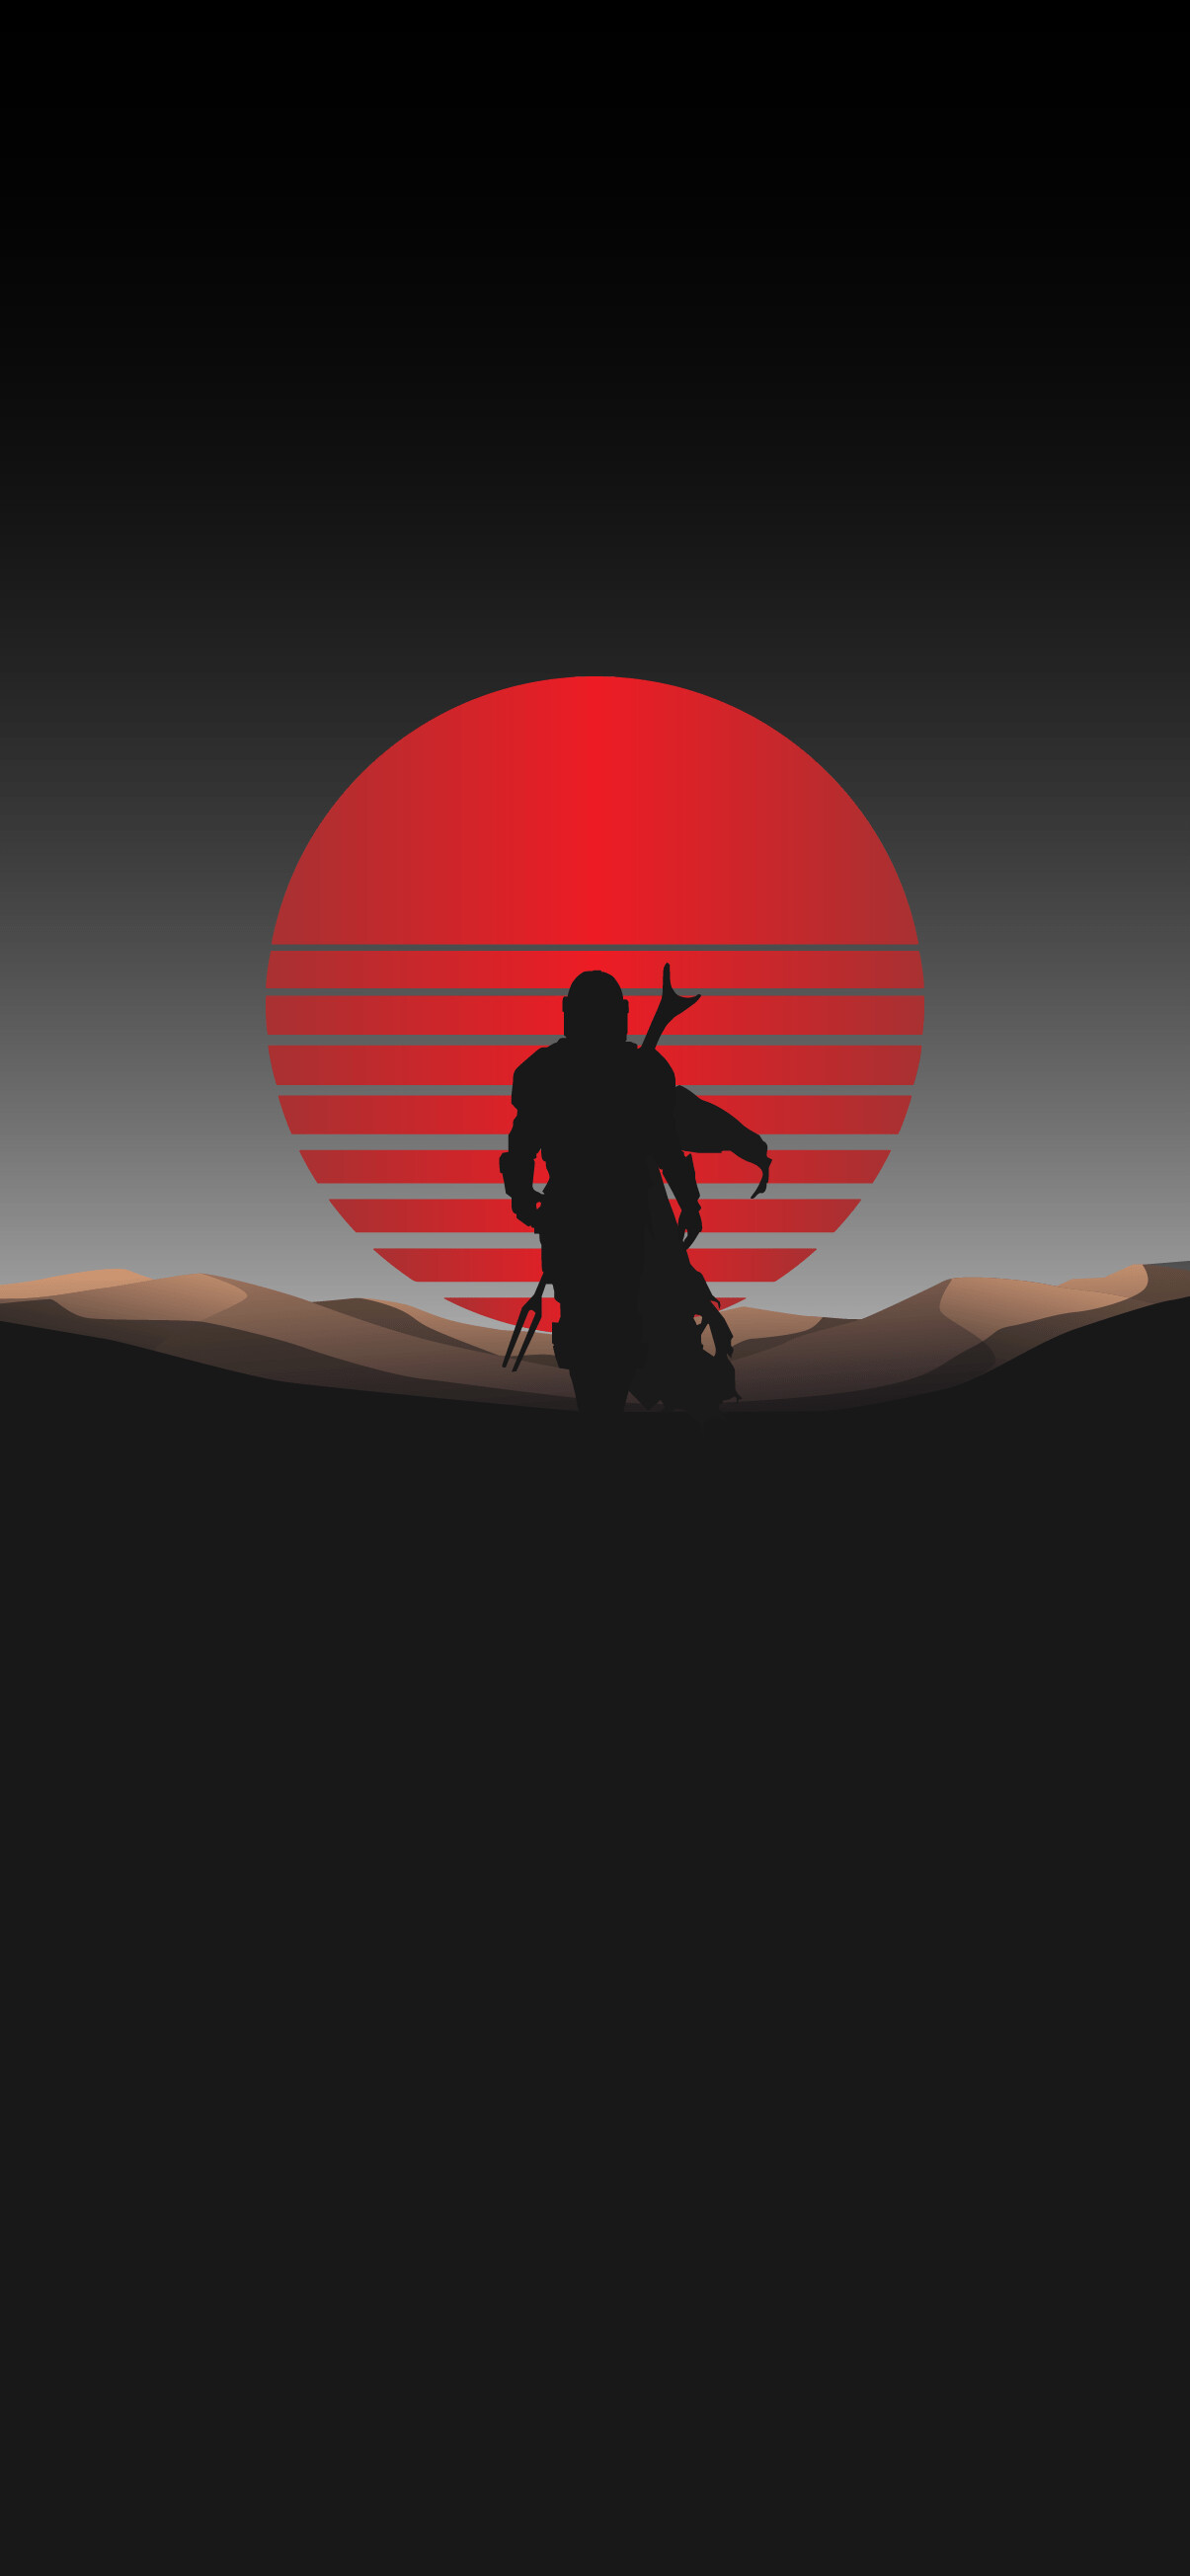 The Mandalorian: Set between the fall of the Empire and the rise of the First Order, TV show, Art. 1210x2610 HD Background.